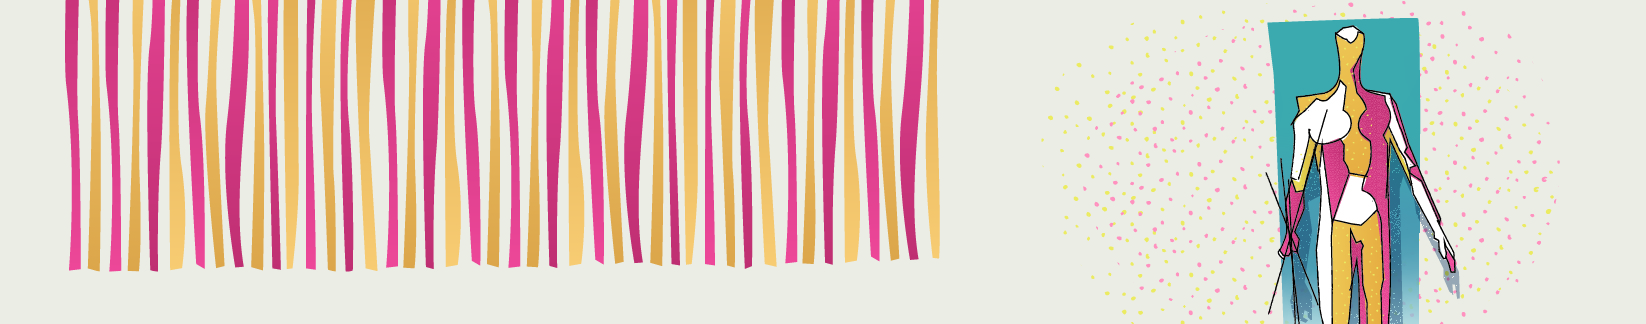 Infographic with yellow and pink vertical lines on left and man holding sticks on right